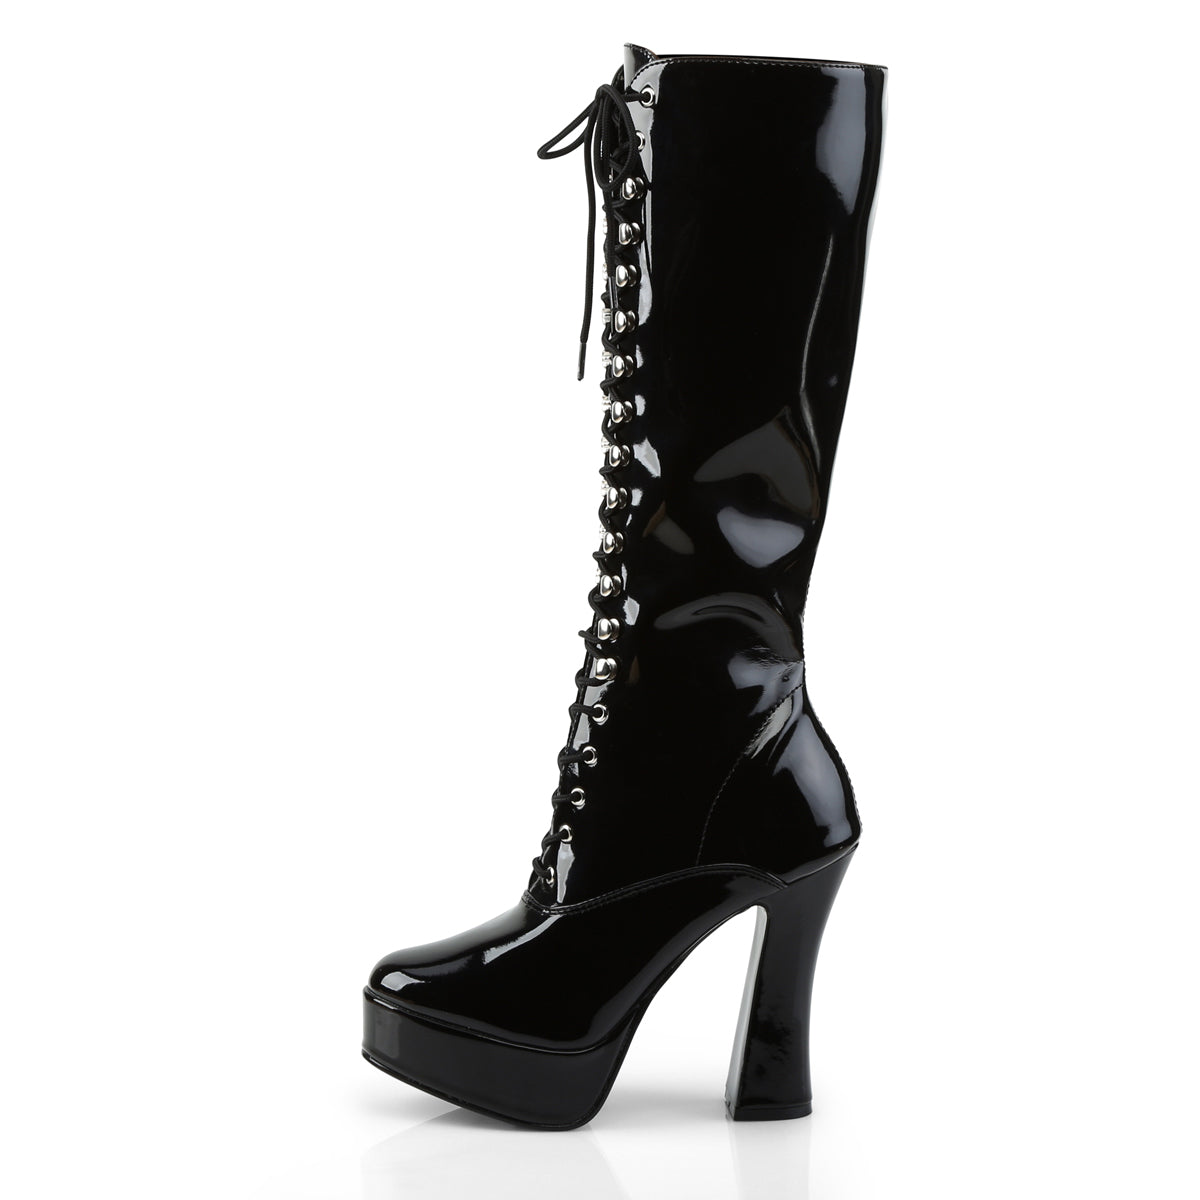 5" Electra Lace Up Knee Boot in black patent, left side view.